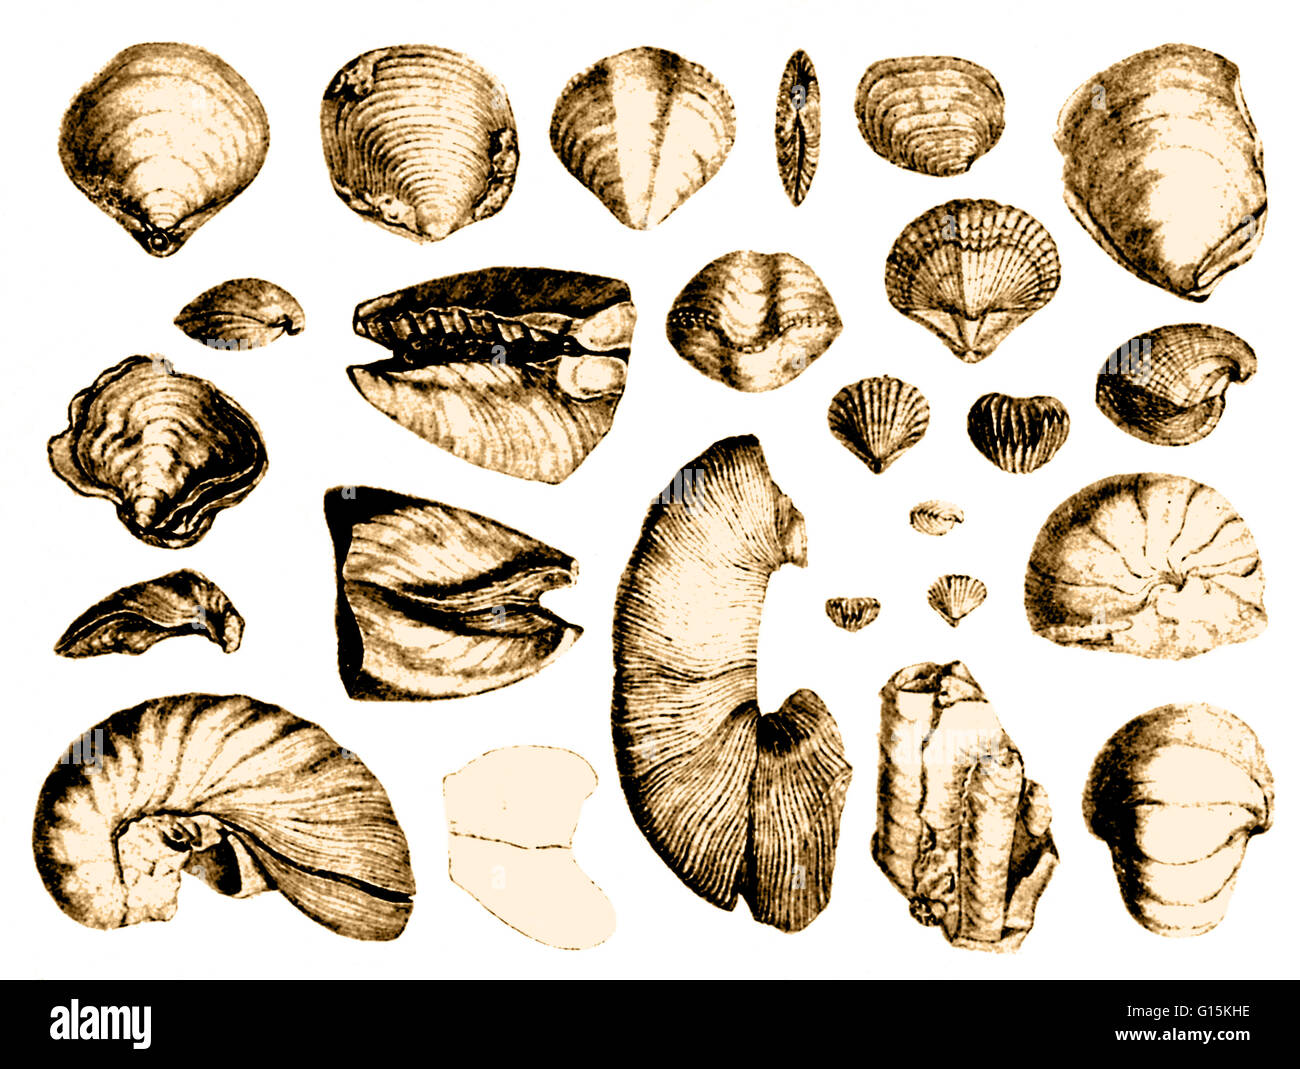 Color enhanced image of fossilized shells drawn from Darwin's 'Geological Observations on Volcanic Islands'  which describes the geological observations made of South America and its surrounding volcanic islands during his voyage on the H.M.S. Beagle. FUL Stock Photo